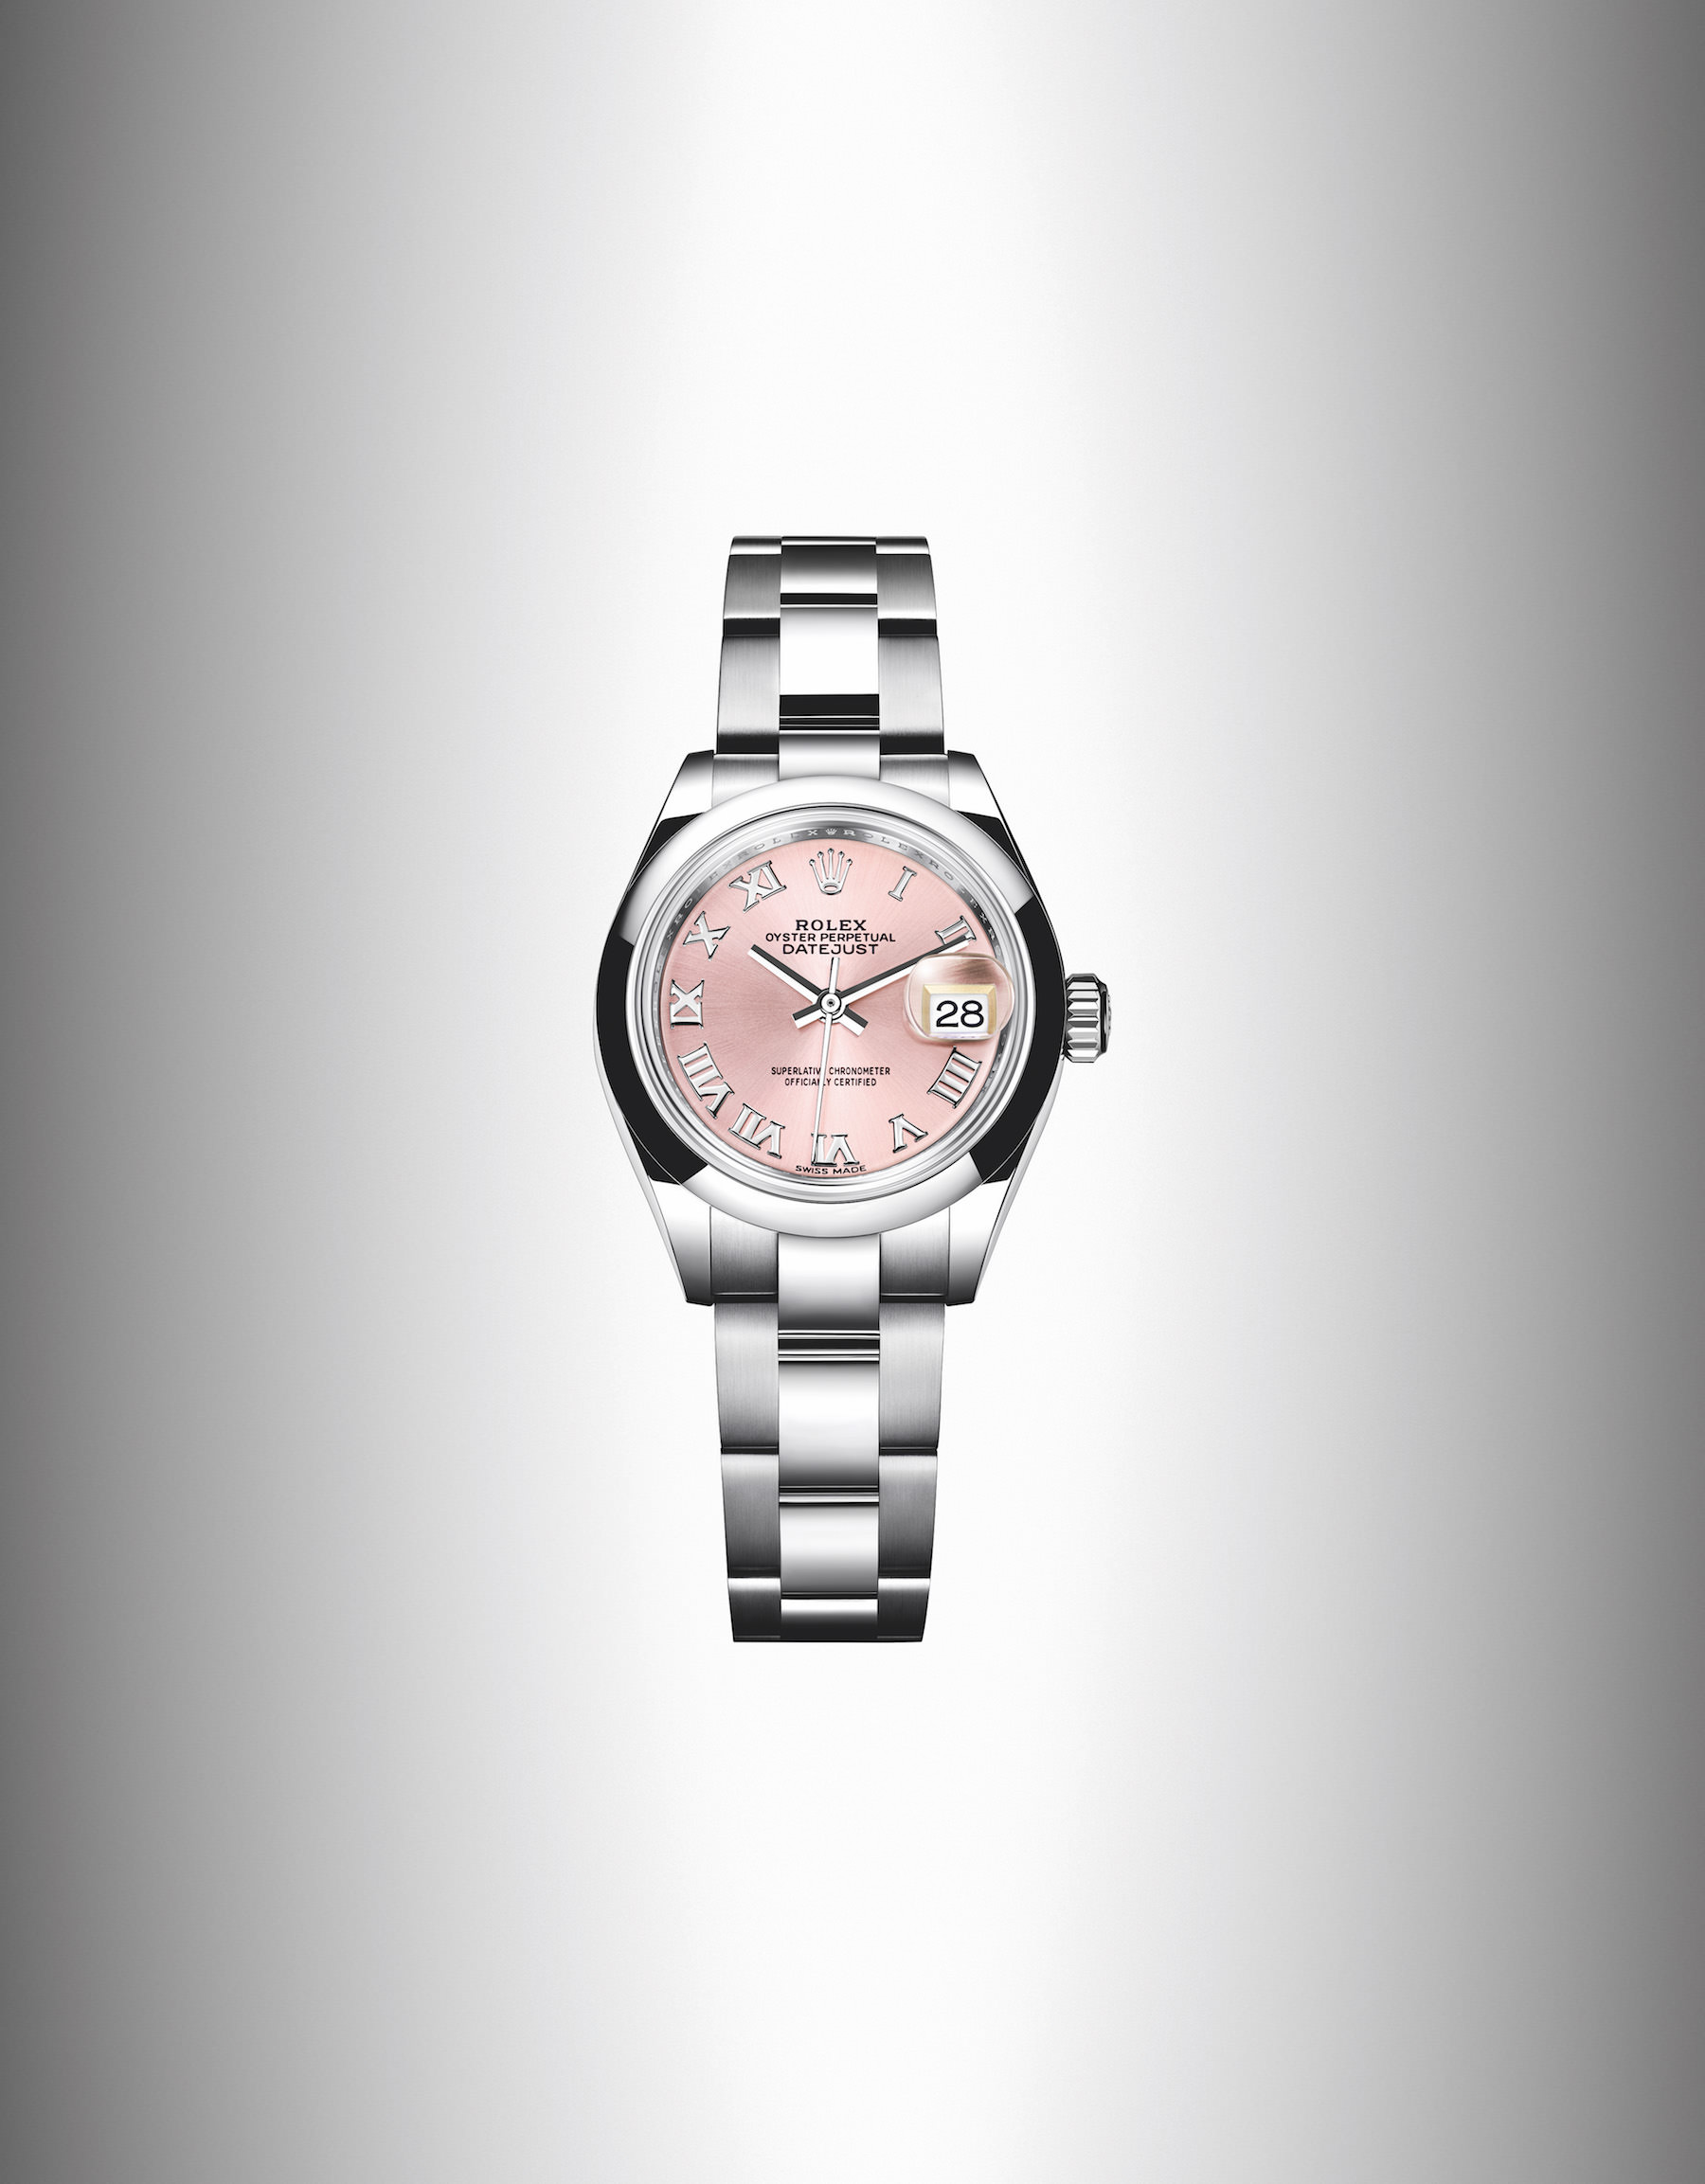 Die Rolex Oyster Perpetual Lady-Datejust 28